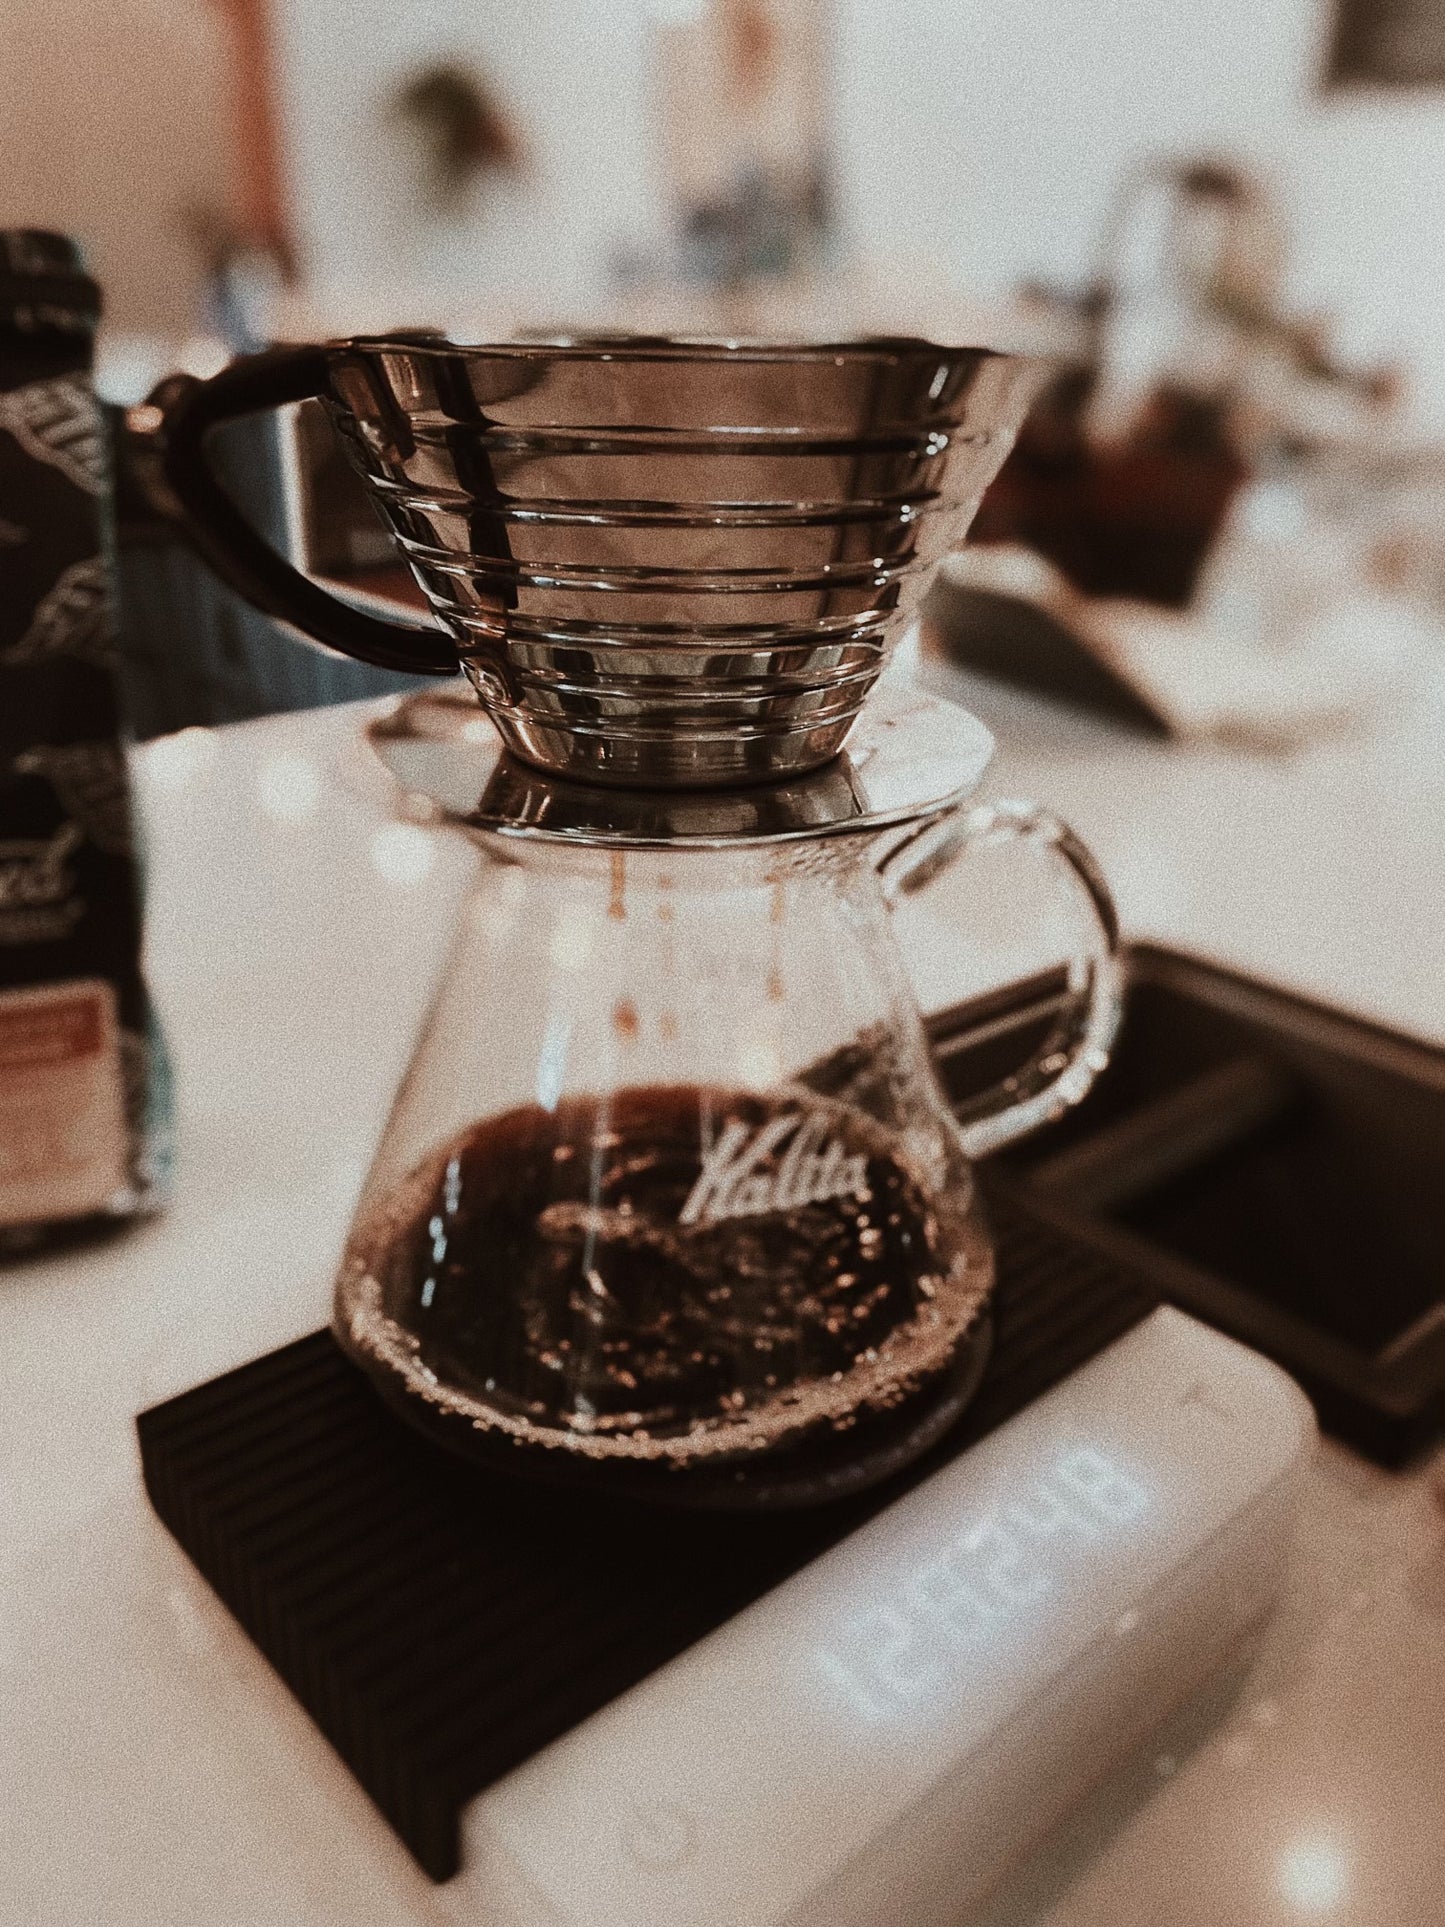 Pour over at Unlocked Coffee